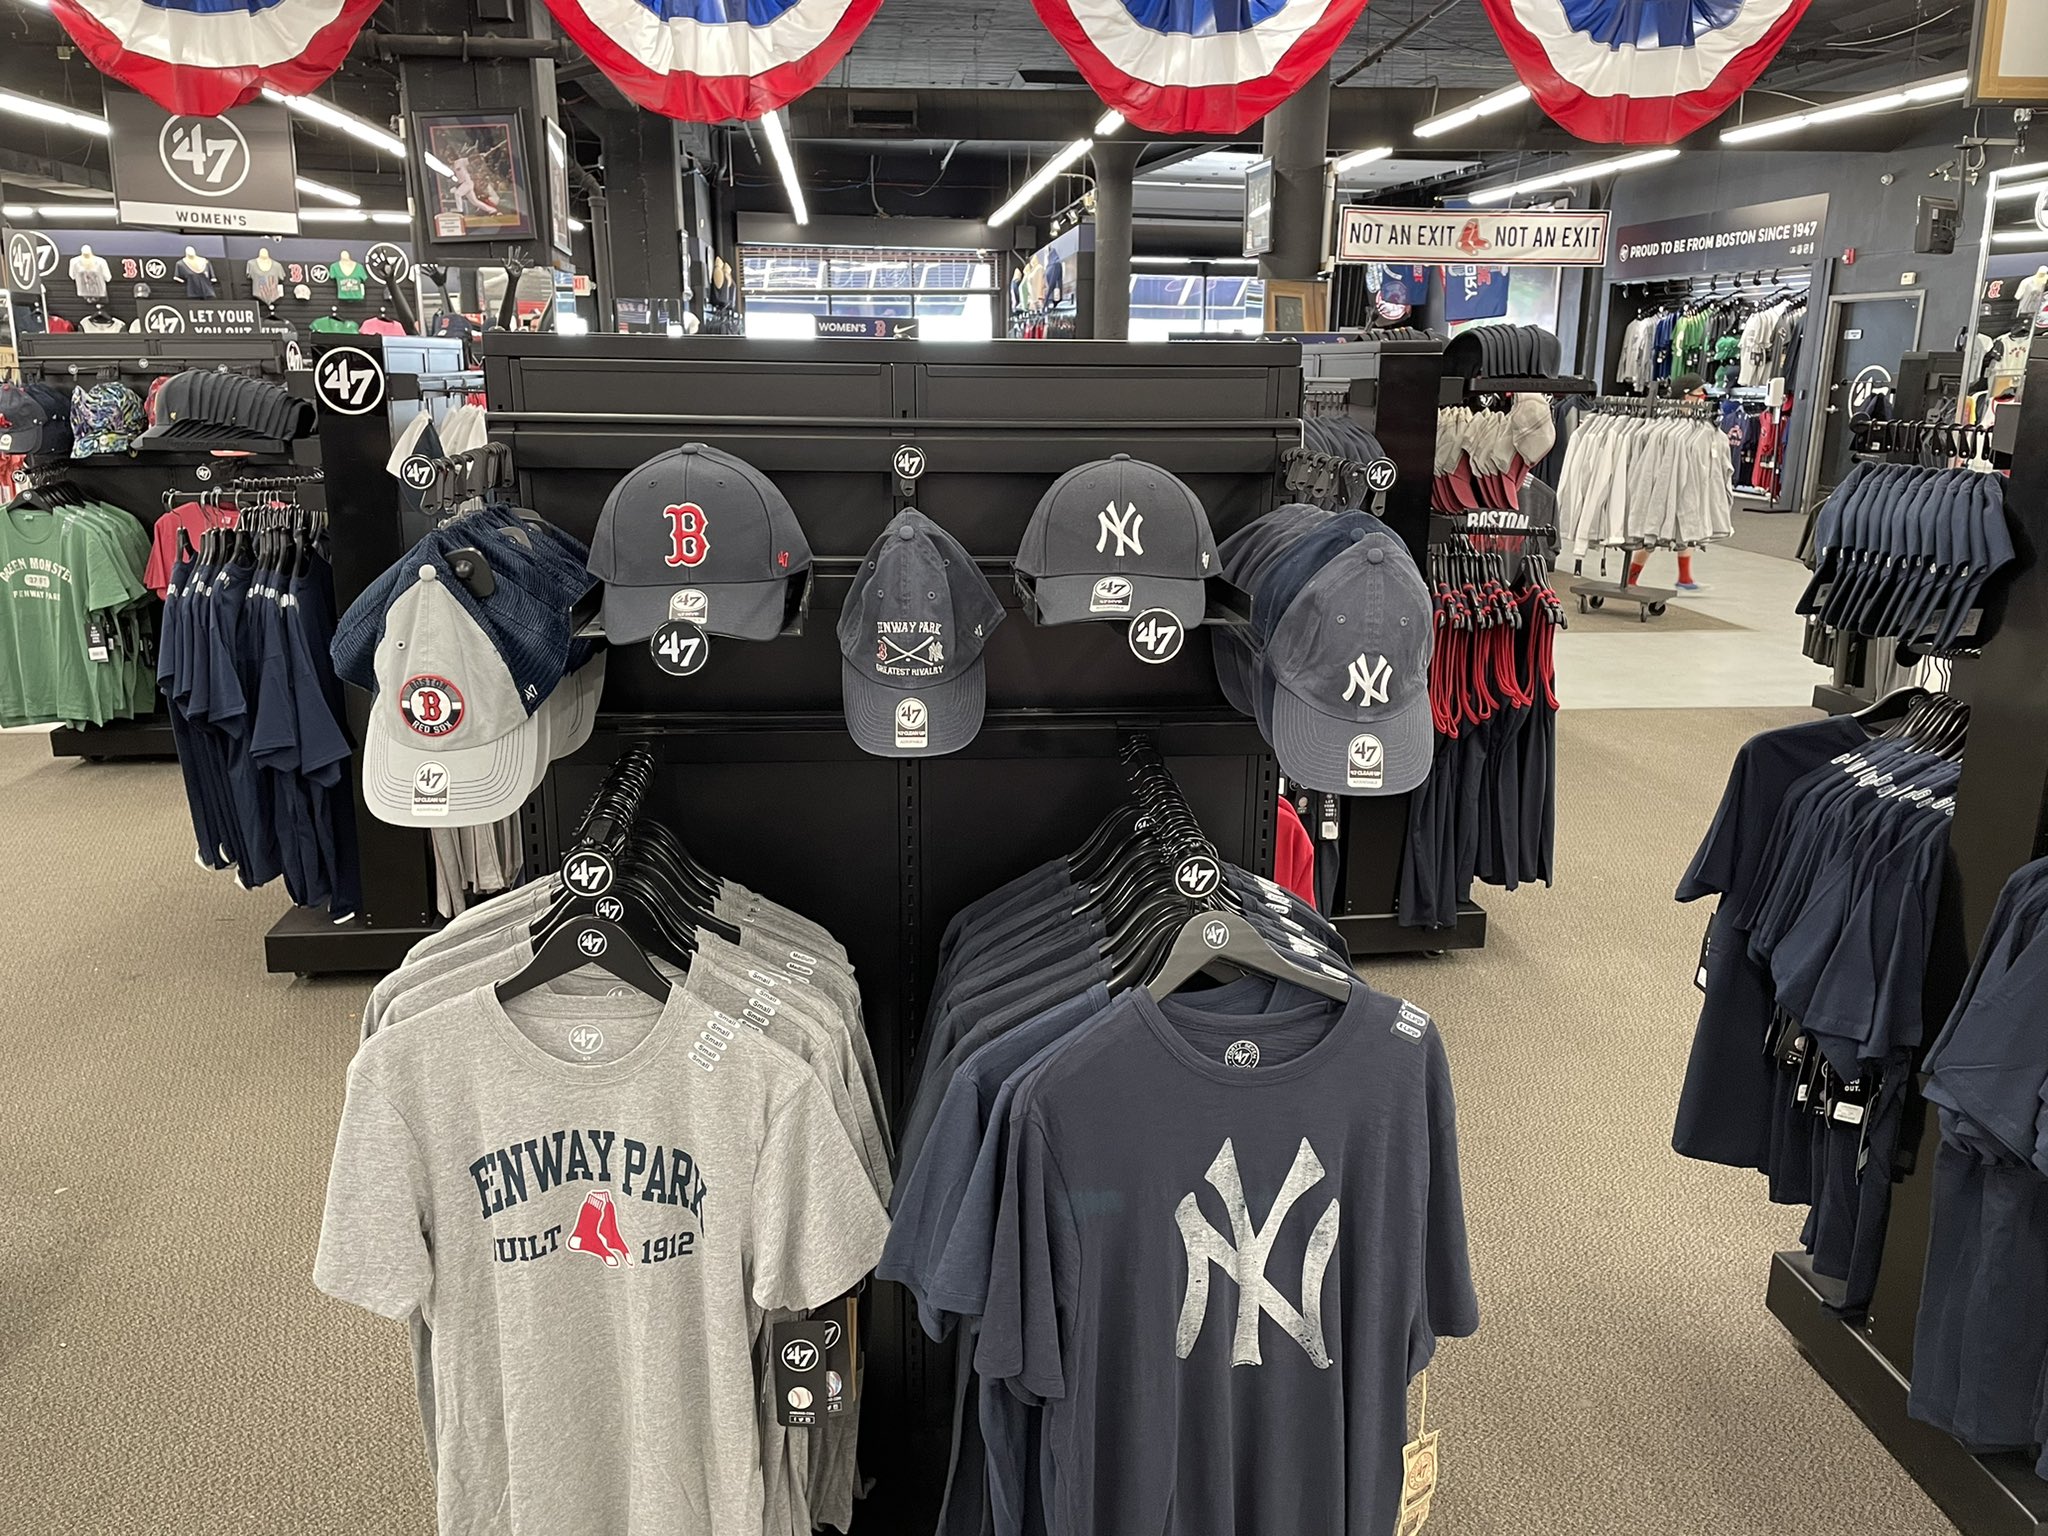 Jake Asman on Twitter: "How does the Park Red Sox team store actually sell #Yankees gear?! https://t.co/JnZjOUfnbv" / X